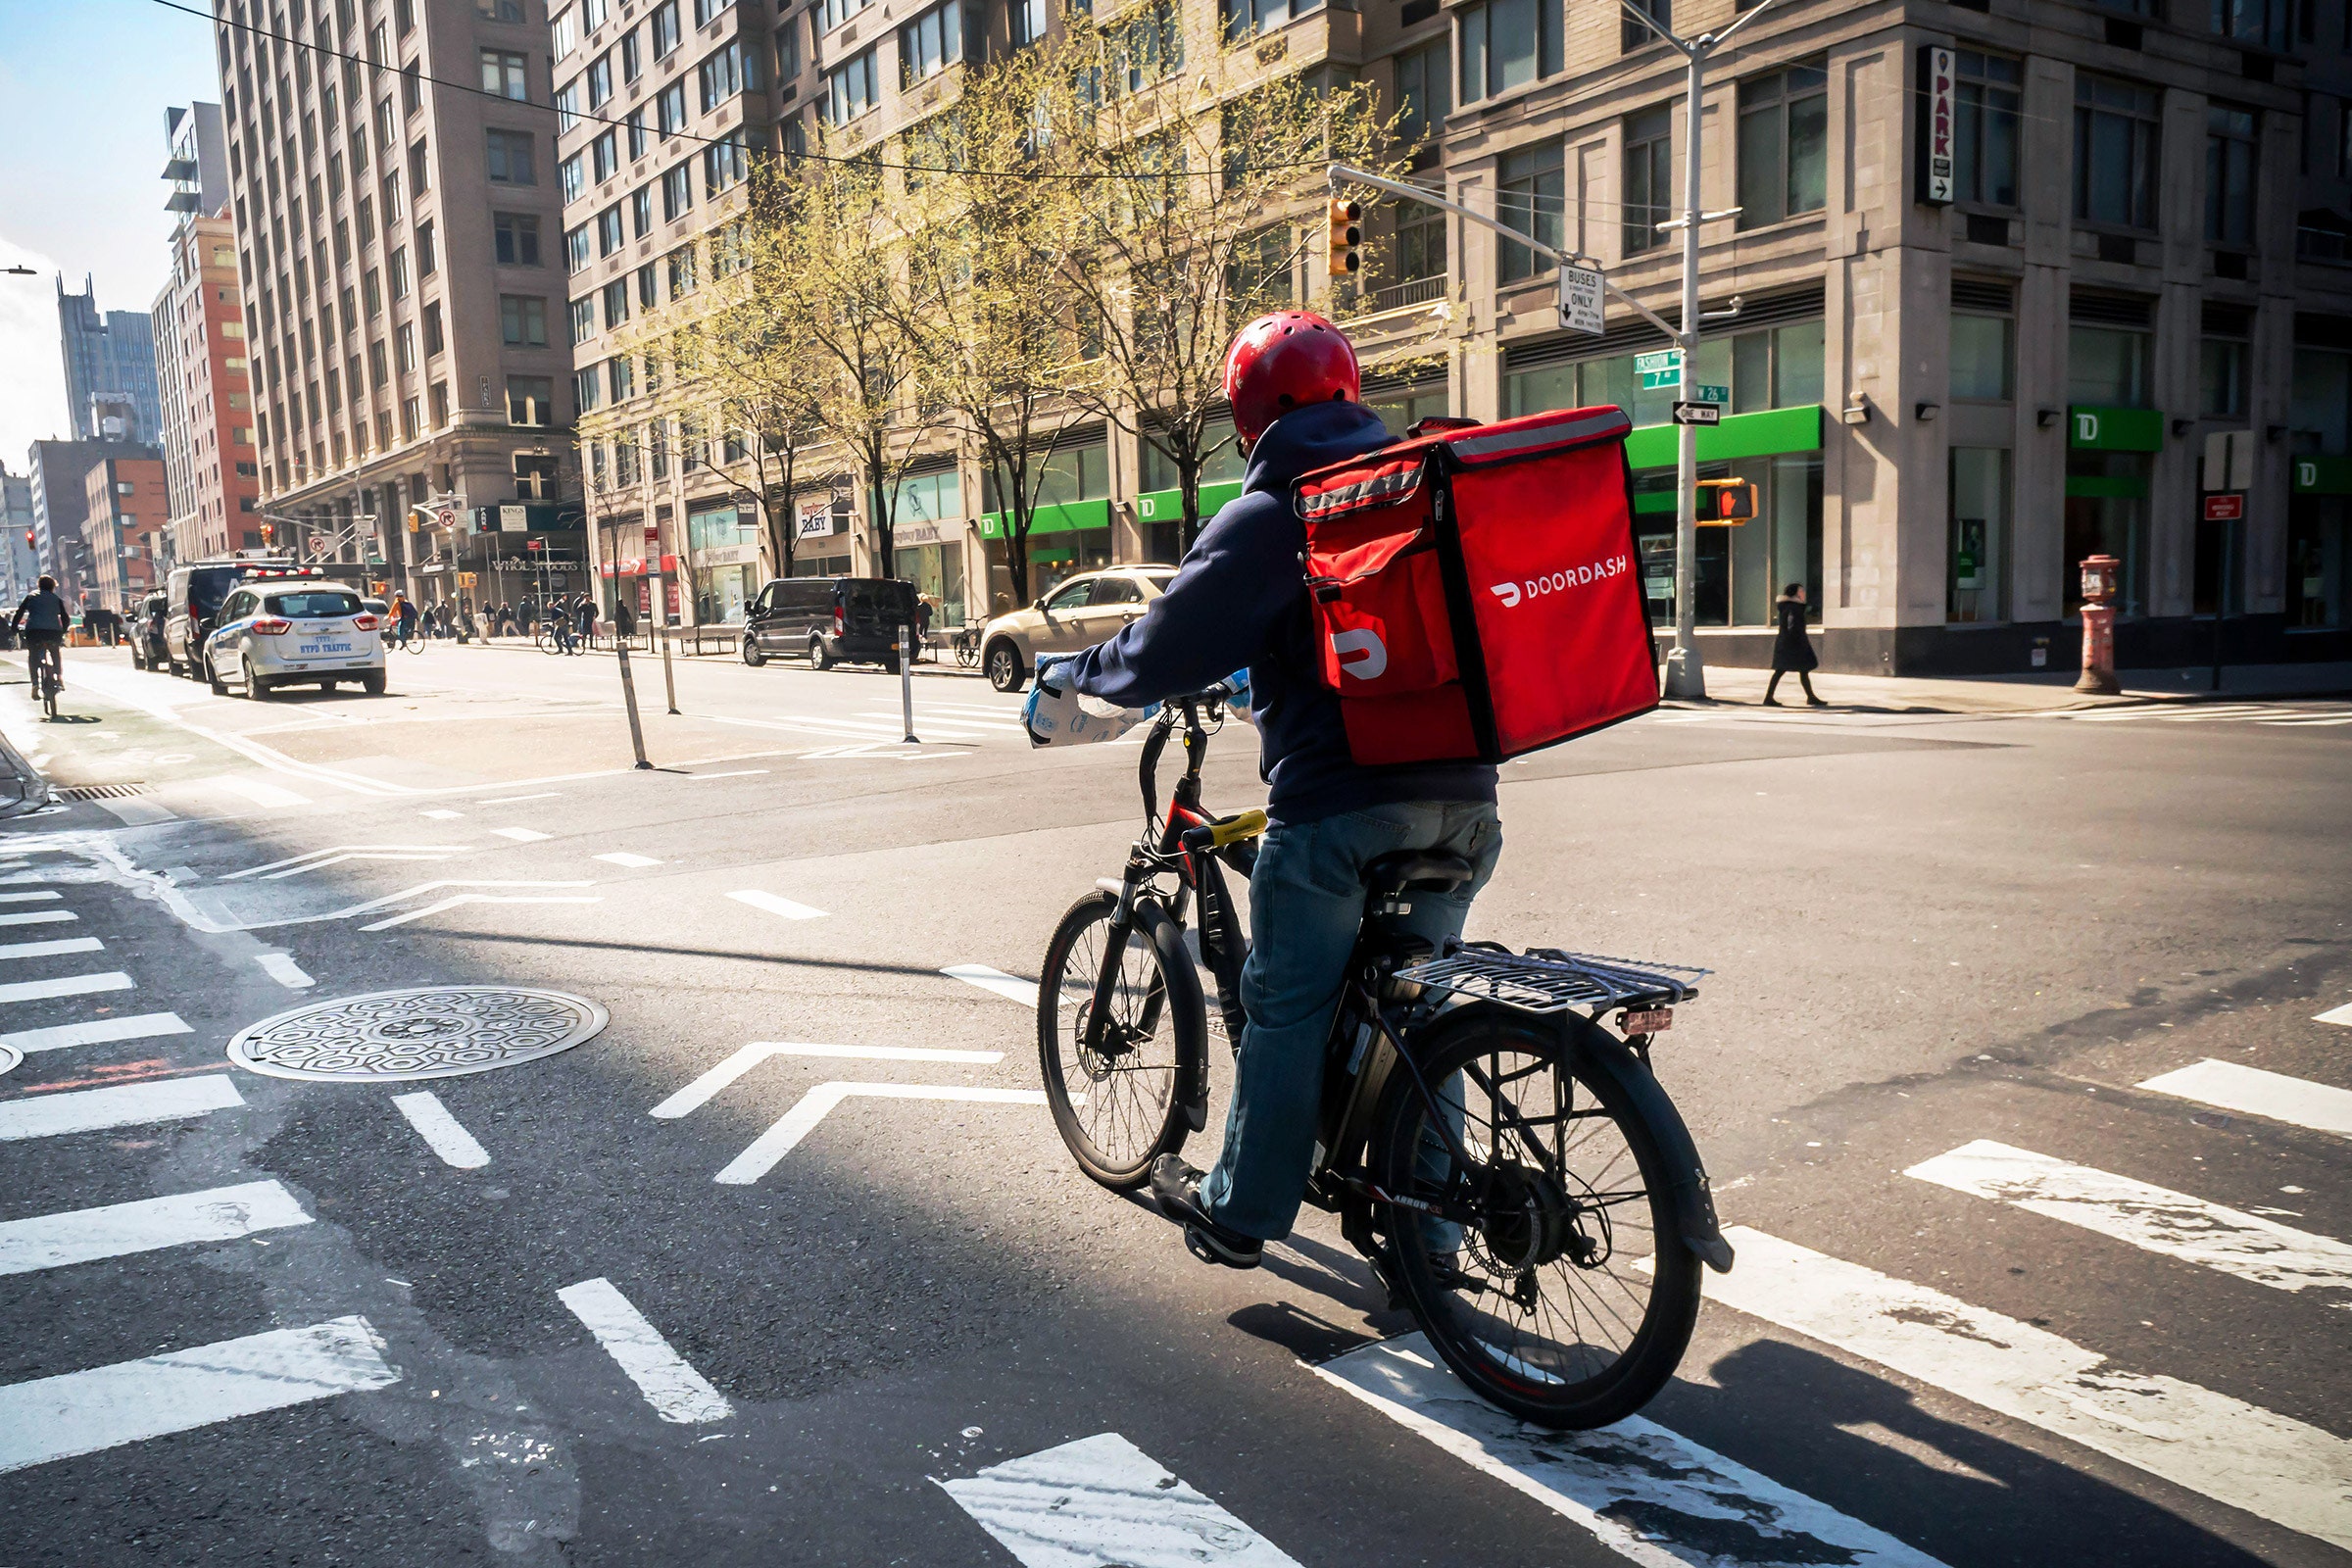 DoorDash Joins the Instantaneous Transport Game—With Workers